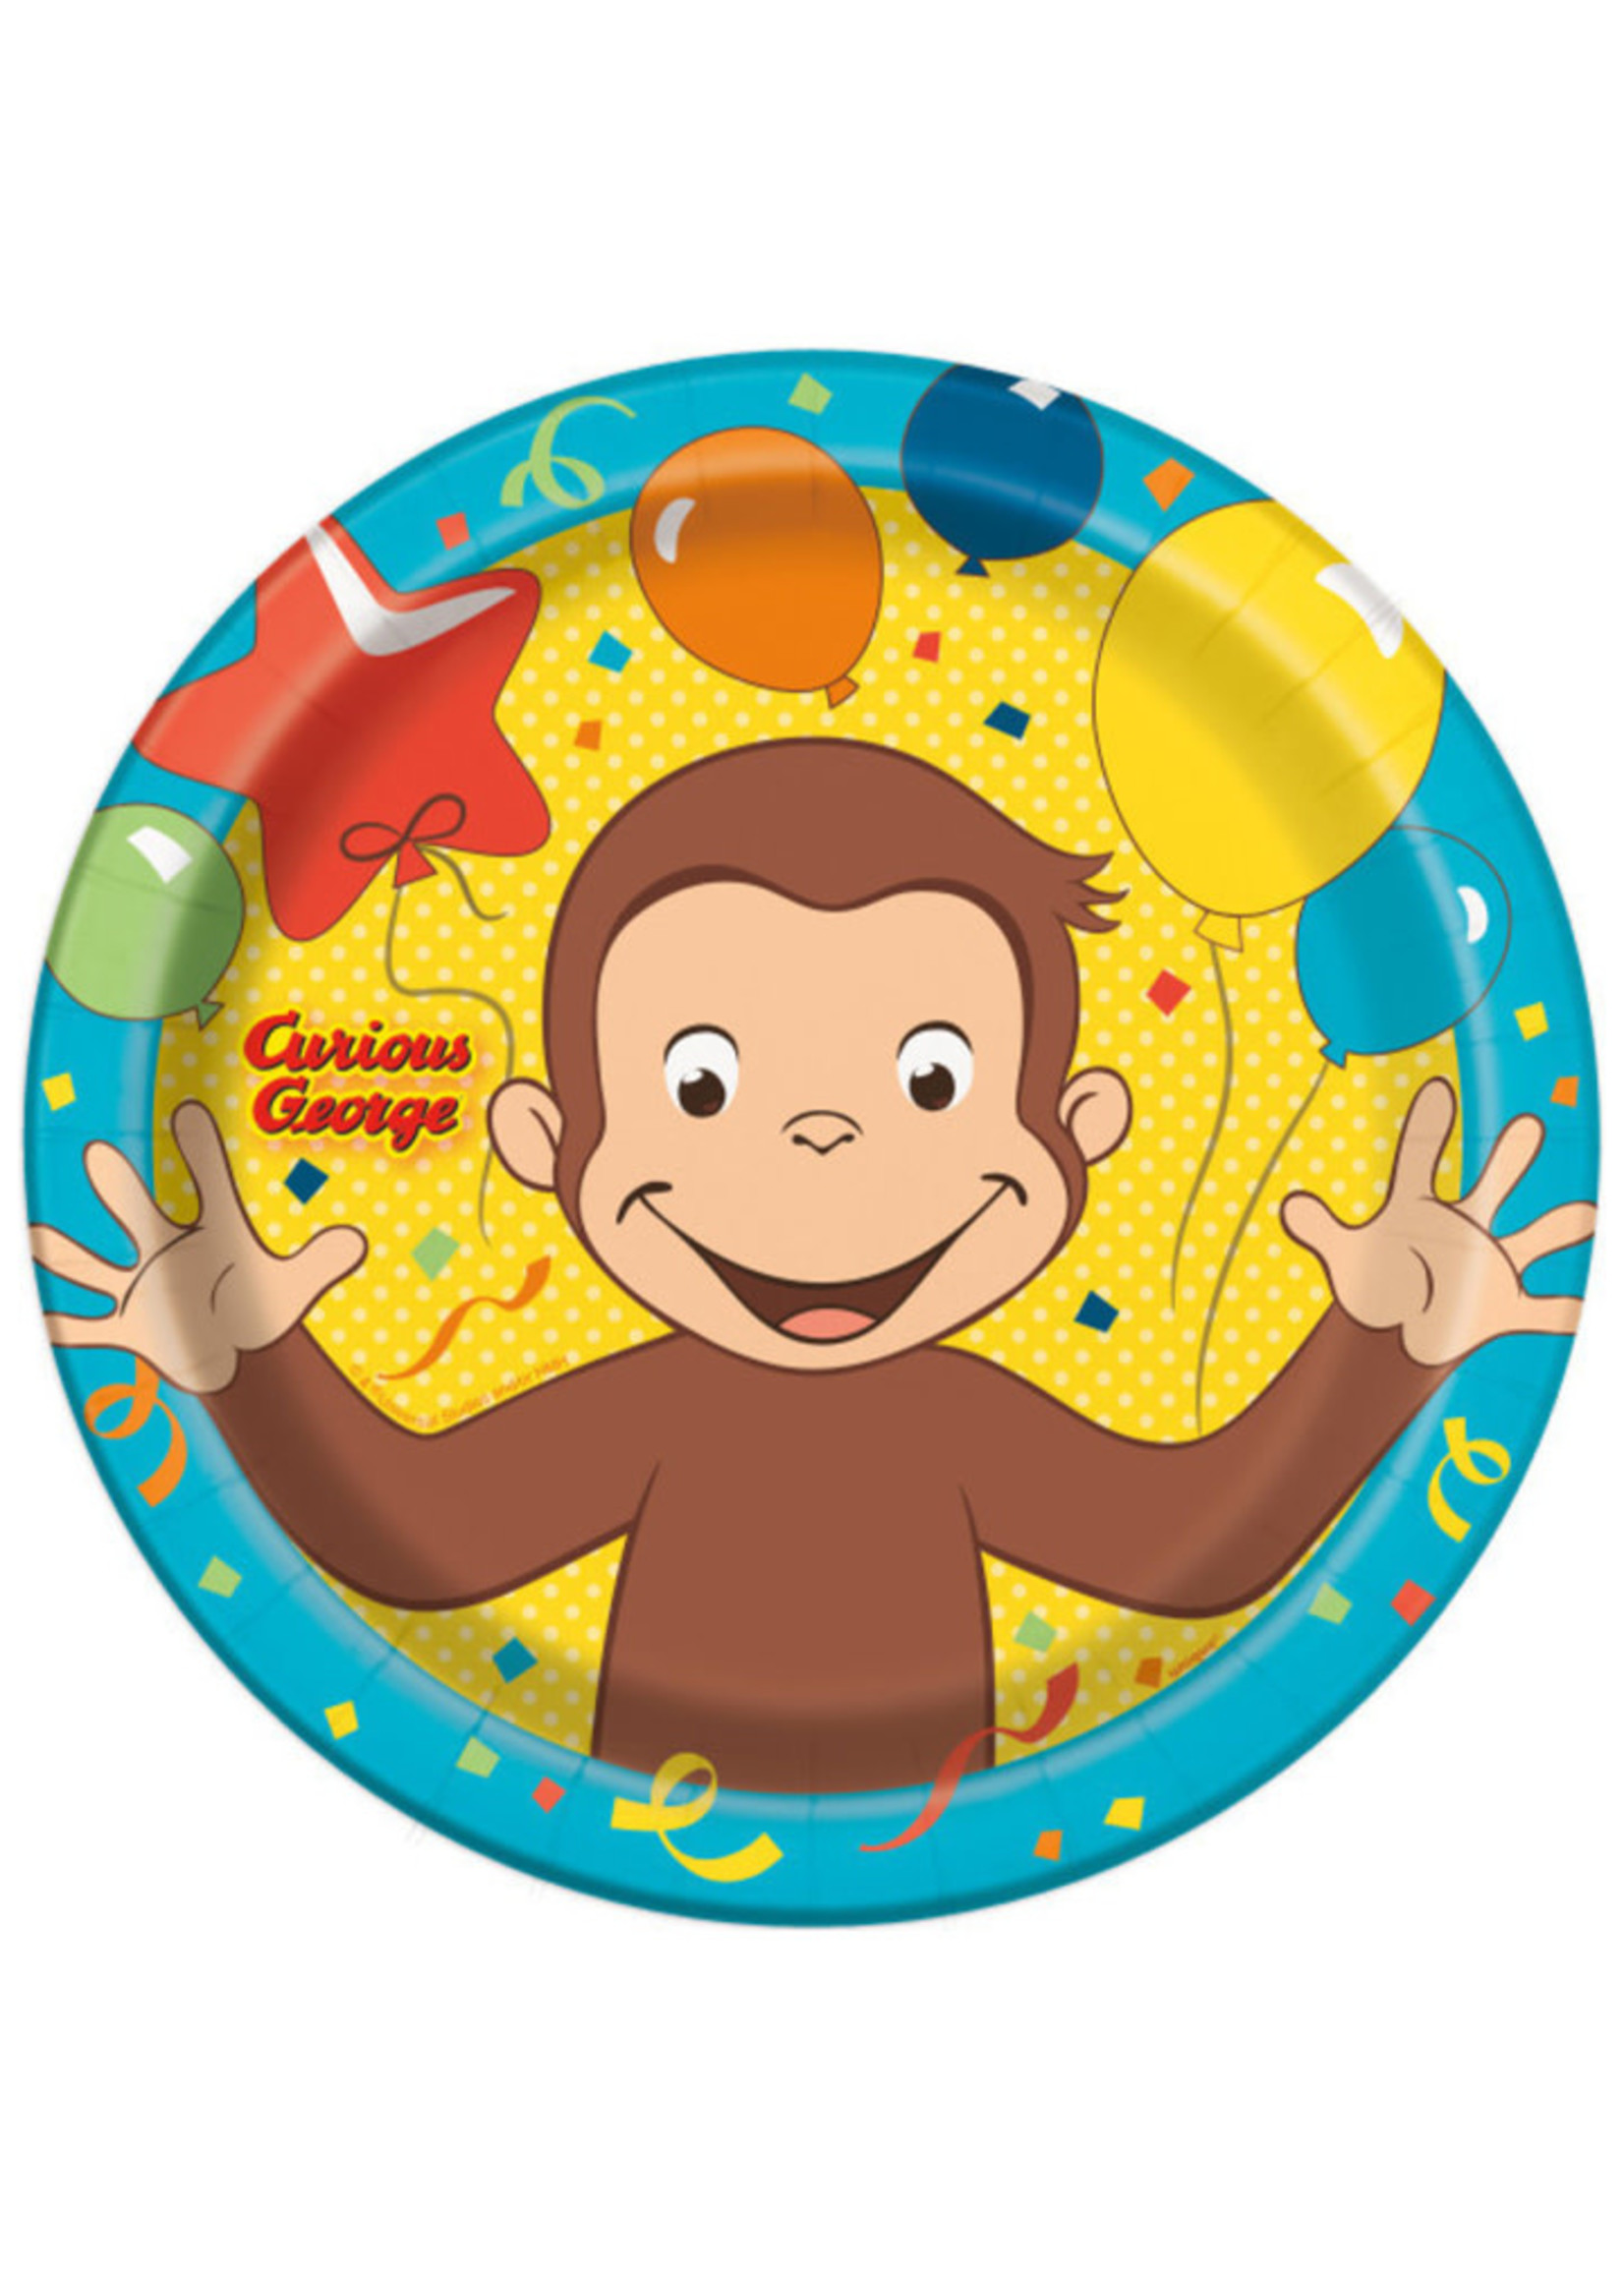 UNIQUE INDUSTRIES INC Curious George 9in Luncheon Plates - 8ct